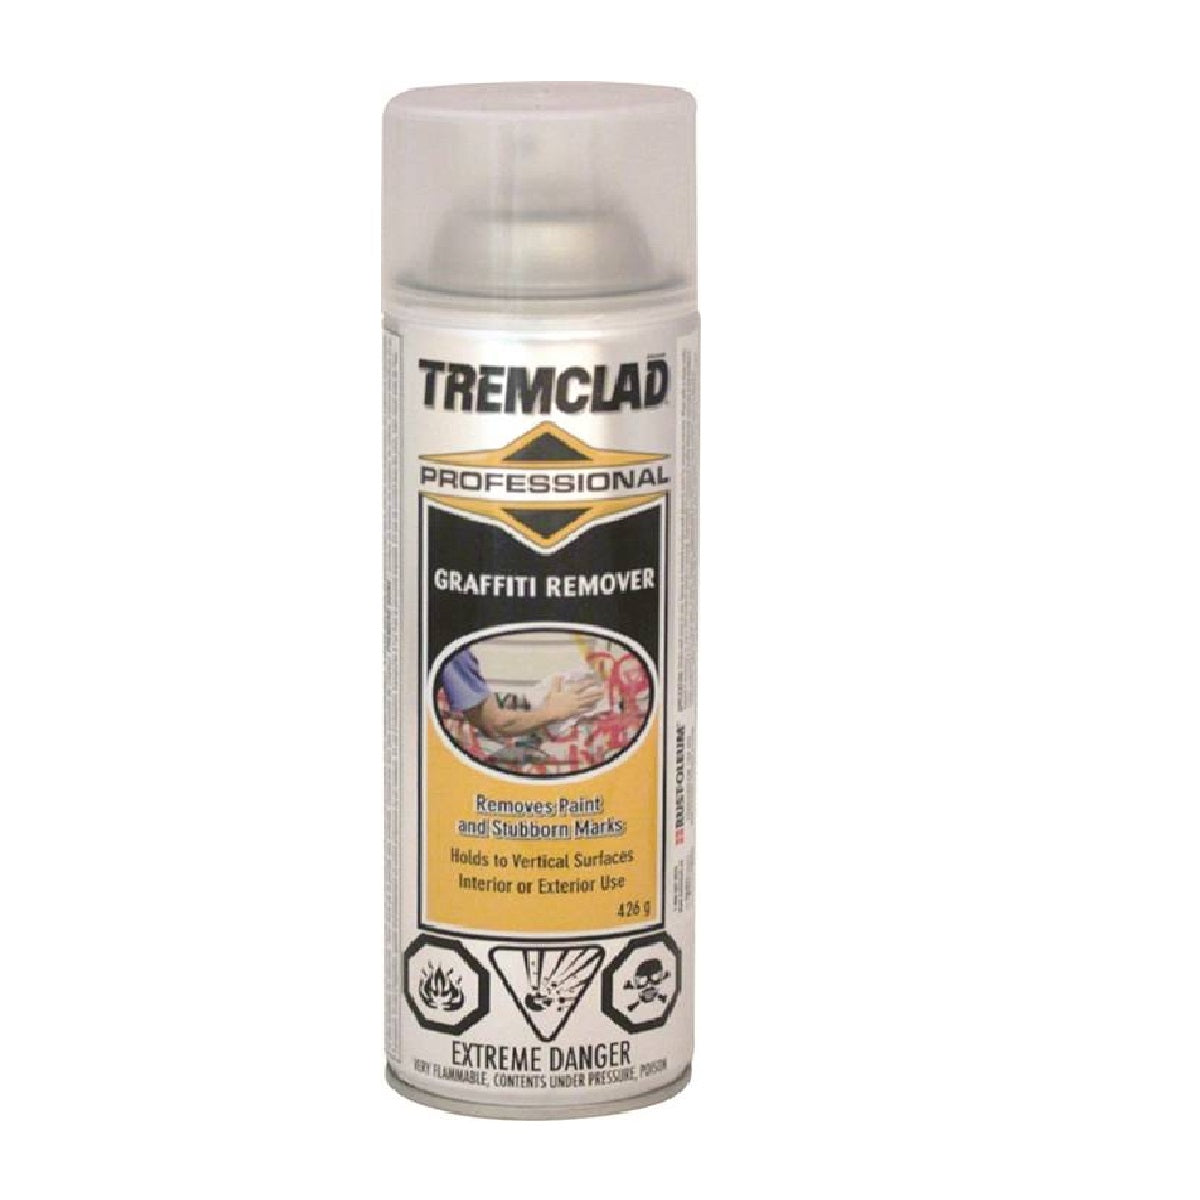 Buy tremclad graffiti remover - Online store for sundries, paint strippers & removers in USA, on sale, low price, discount deals, coupon code